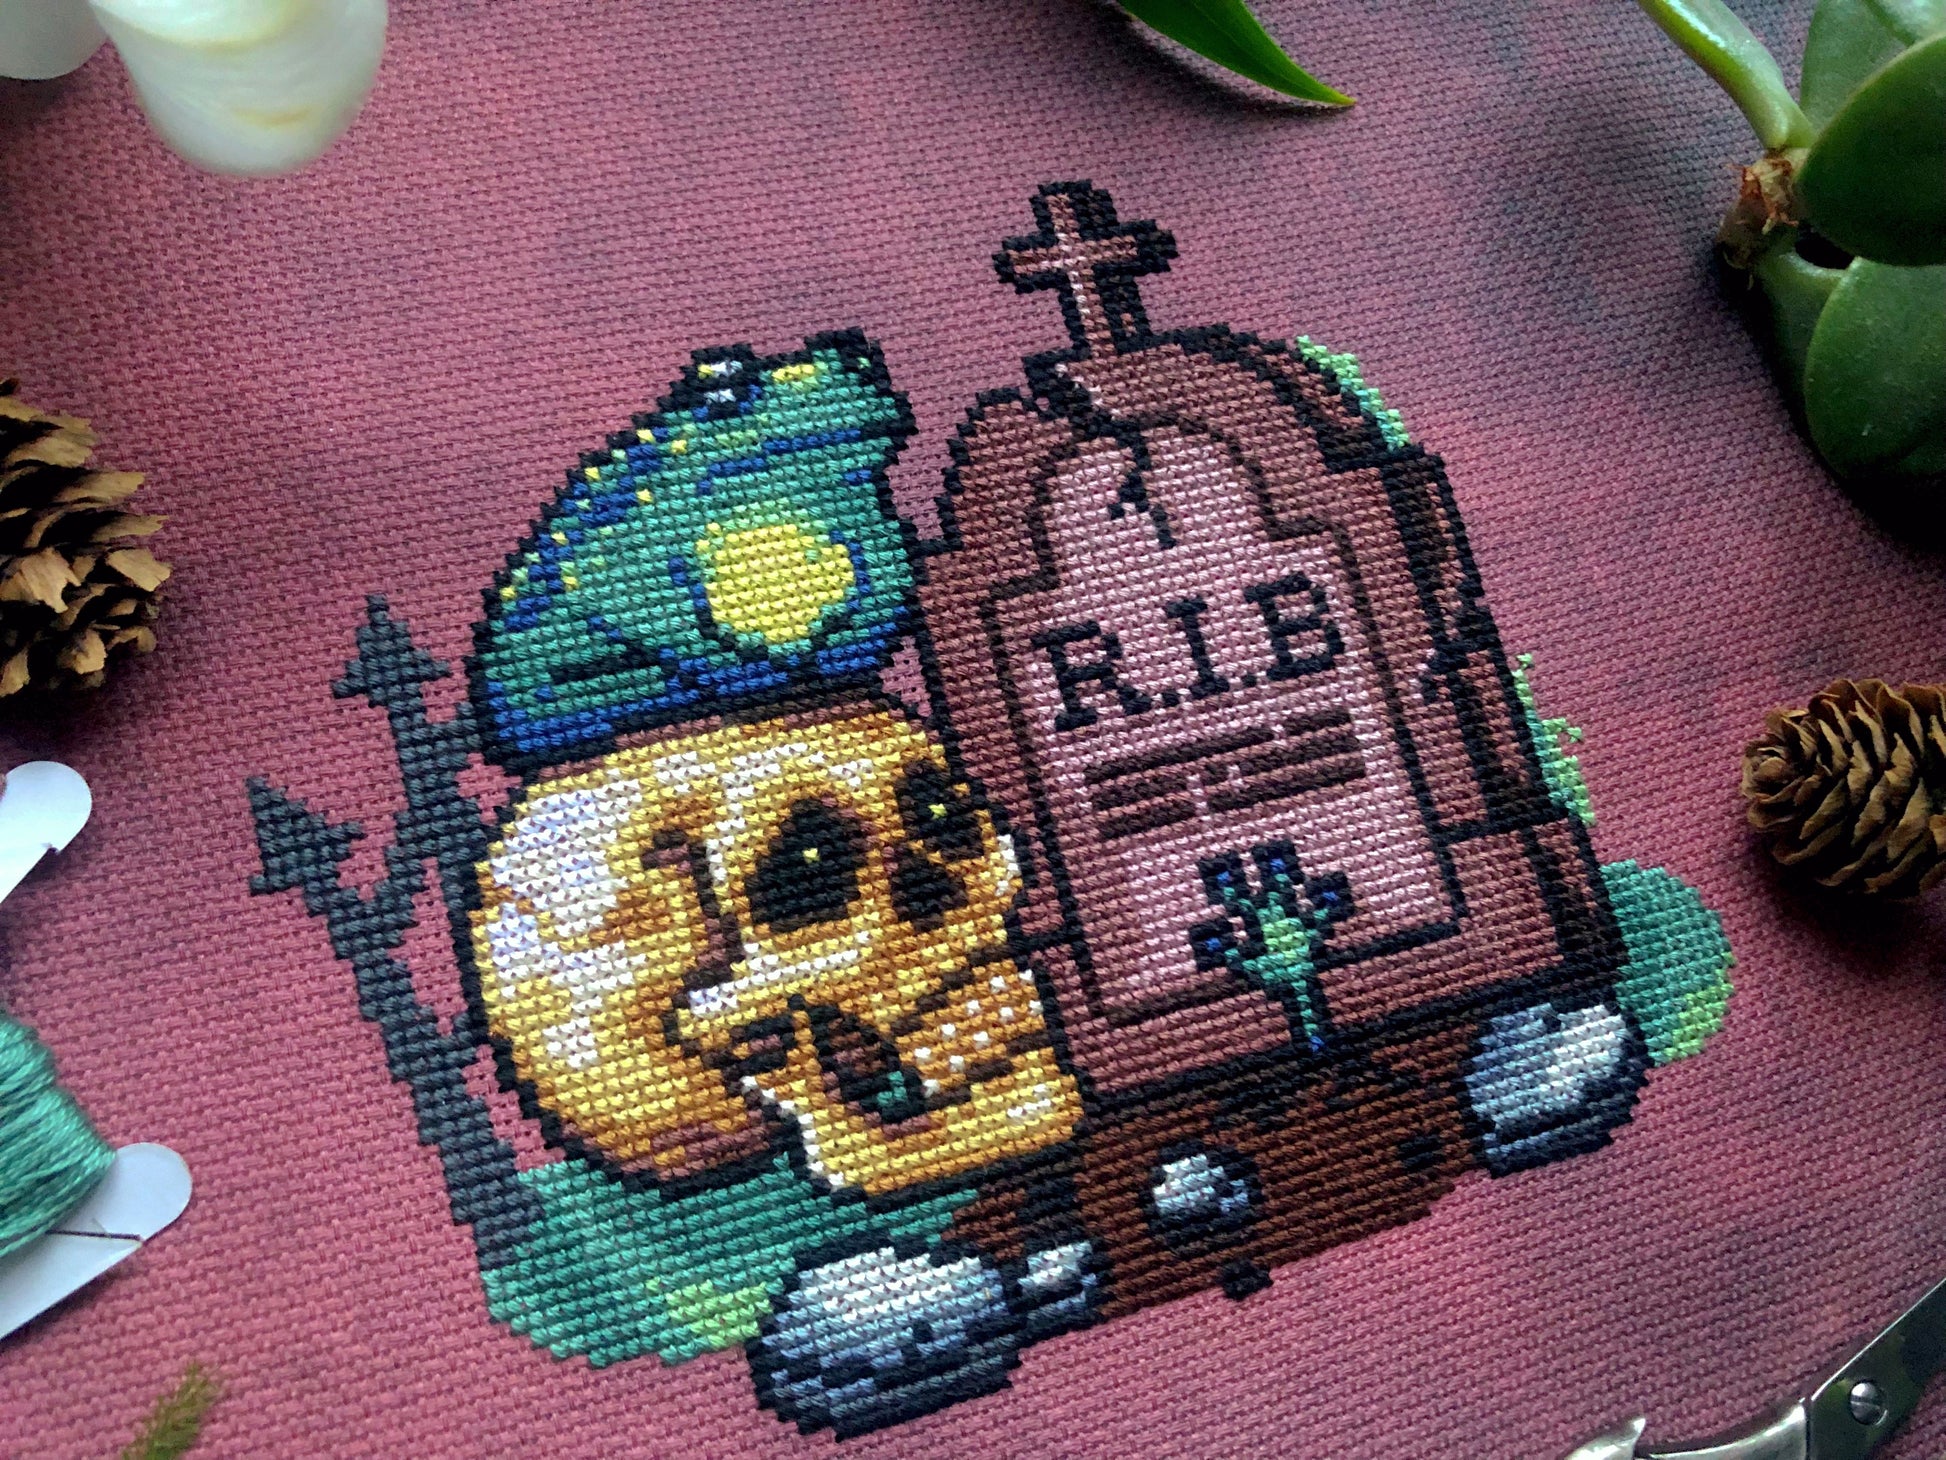 Closeup of frog graveyard Rest in Bog cross stitch pattern. Colors are vibrant. Frog is sitting on a realistic looking skull, next to a tombstone that says R.I.B. From the grave itself a frog hand sticks up, like that of a zombie.